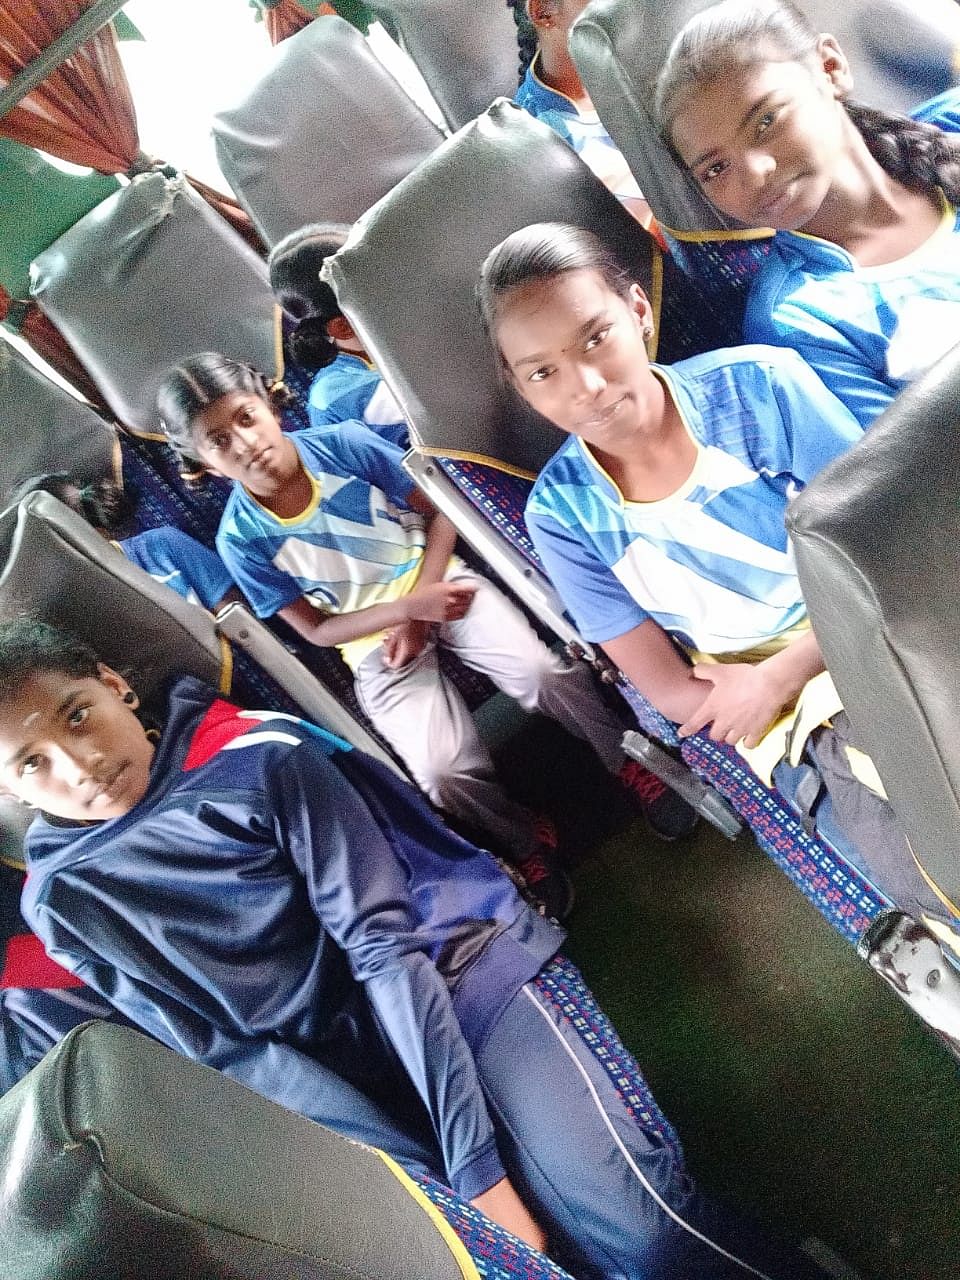 Thanks to you all, the kabaddi girls team from Koovathur, Tamil Nadu is traveling across the state winning laurels.